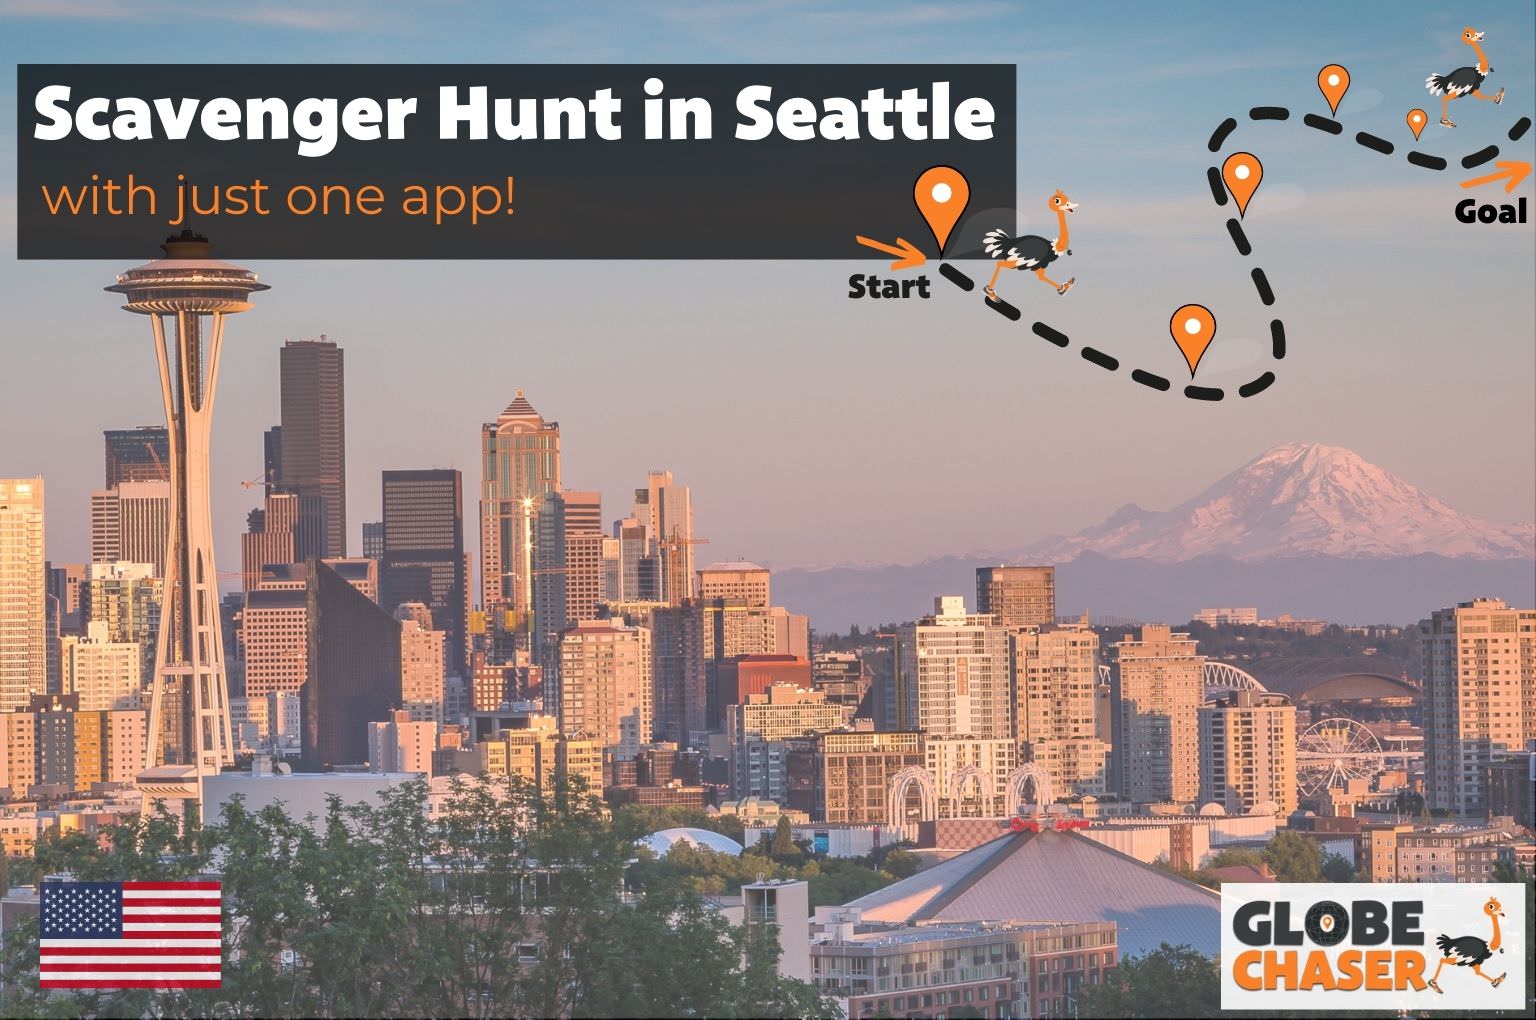 Scavenger Hunt in Seattle, USA - Family Activities with the Globe Chaser App for Outdoor Fun